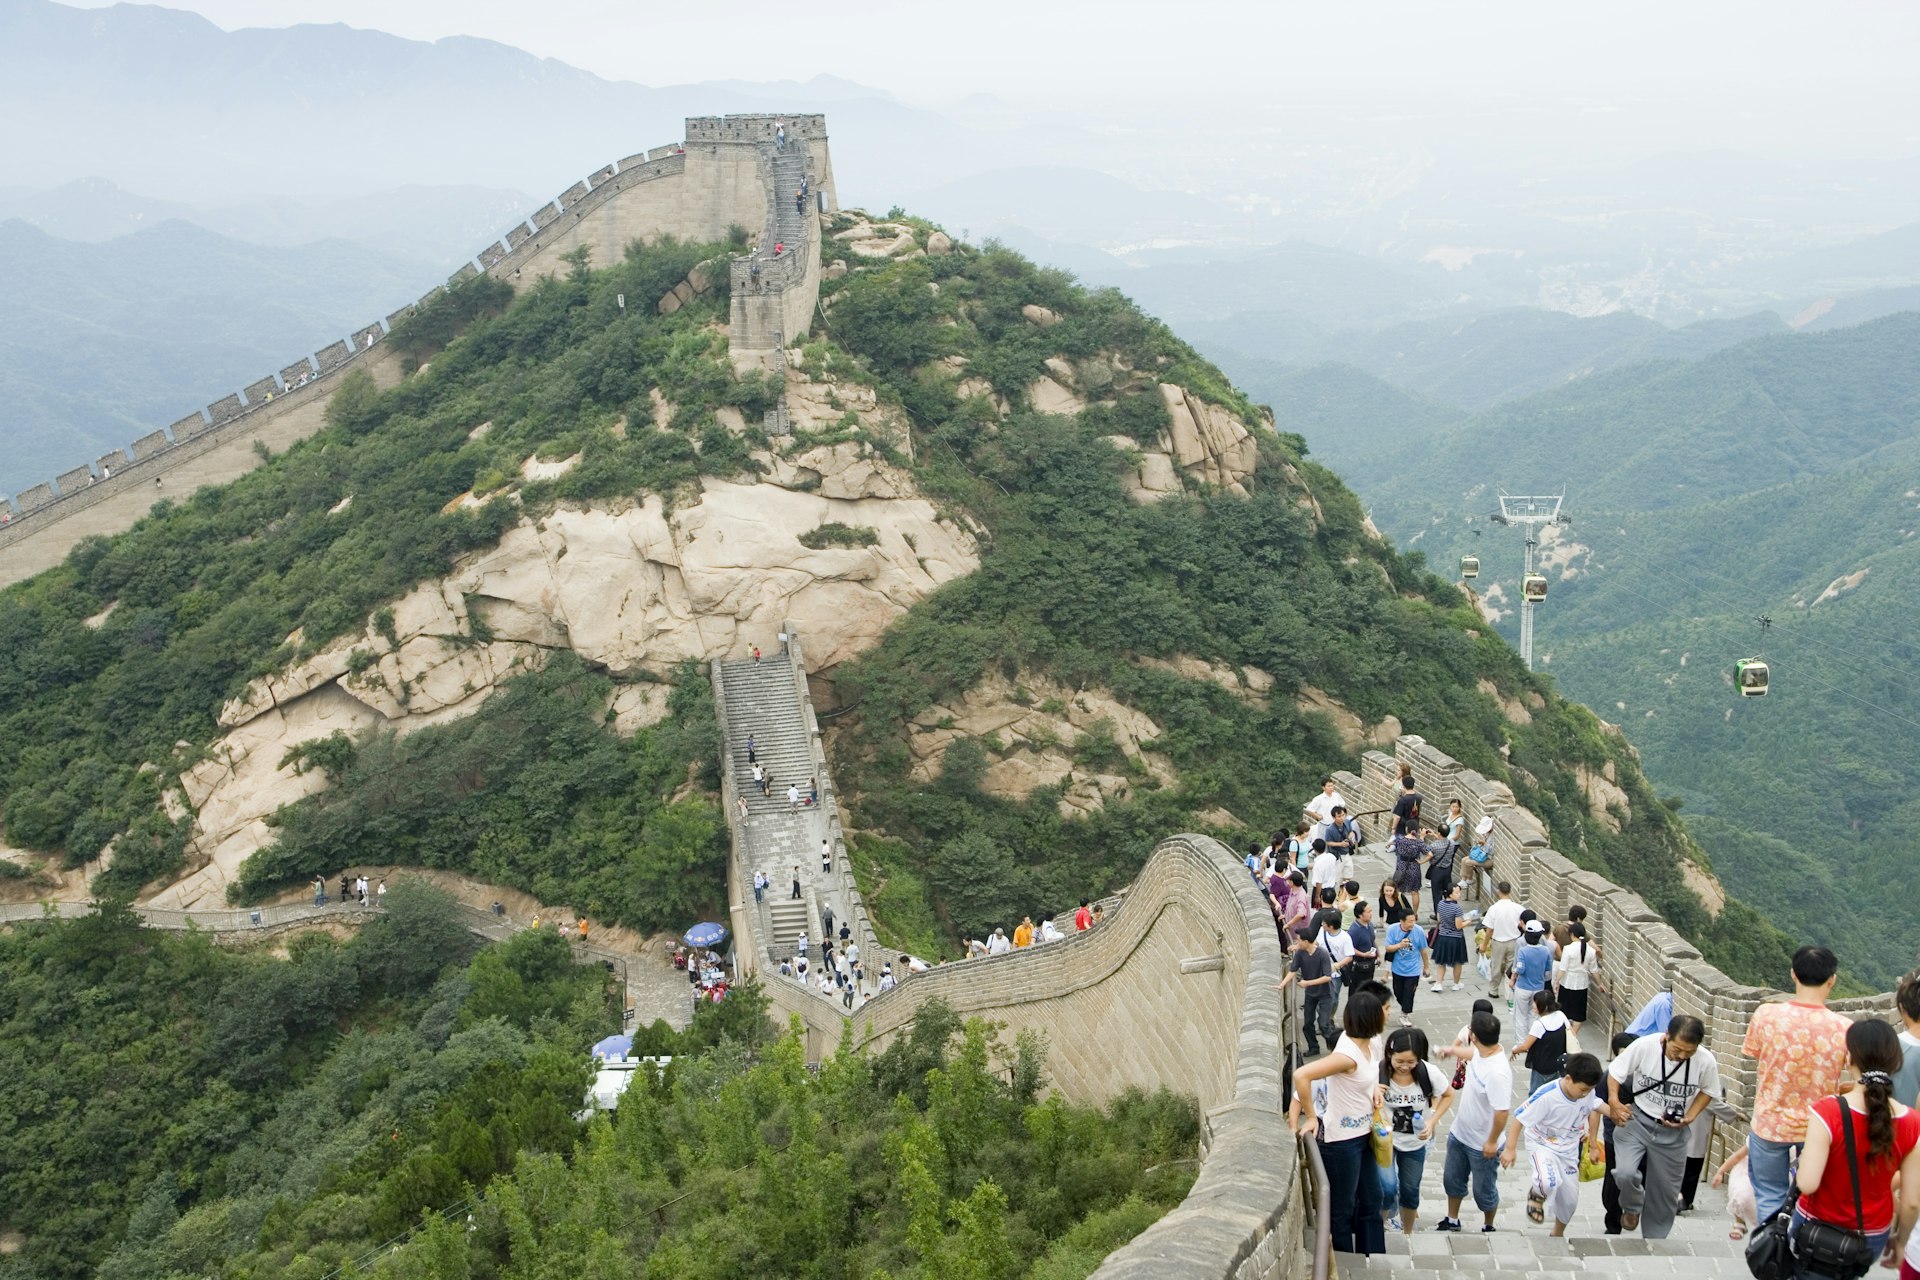 Crowds walk across the Great Wall of China